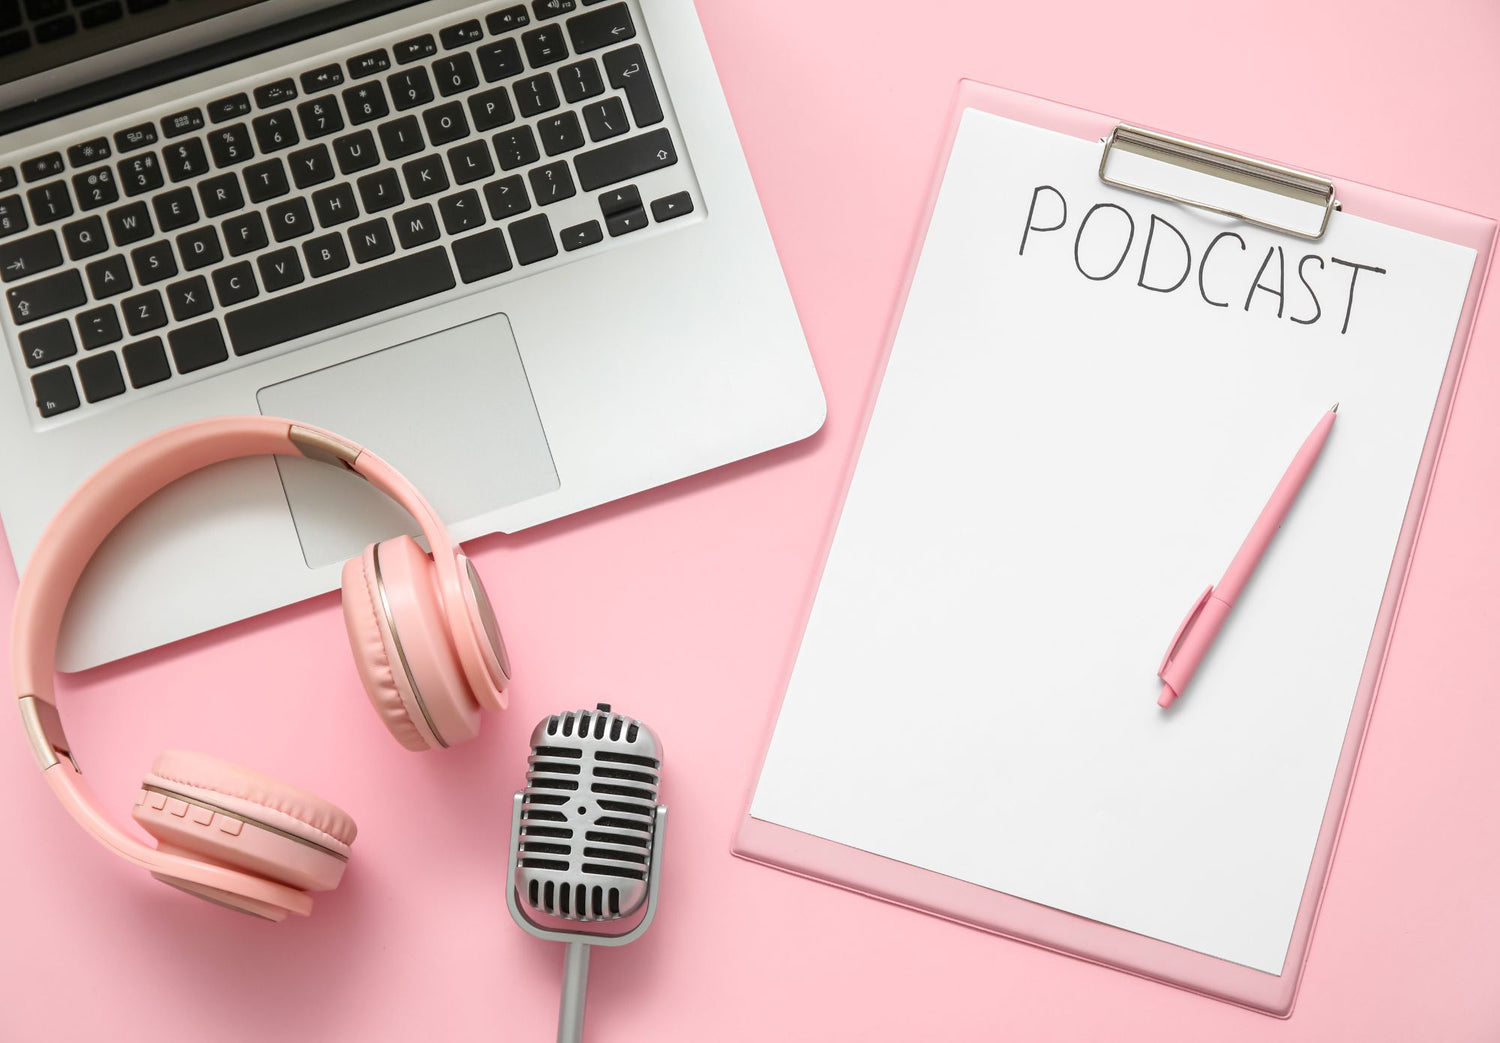 7 Podcasts to Follow for Everything Pop Culture